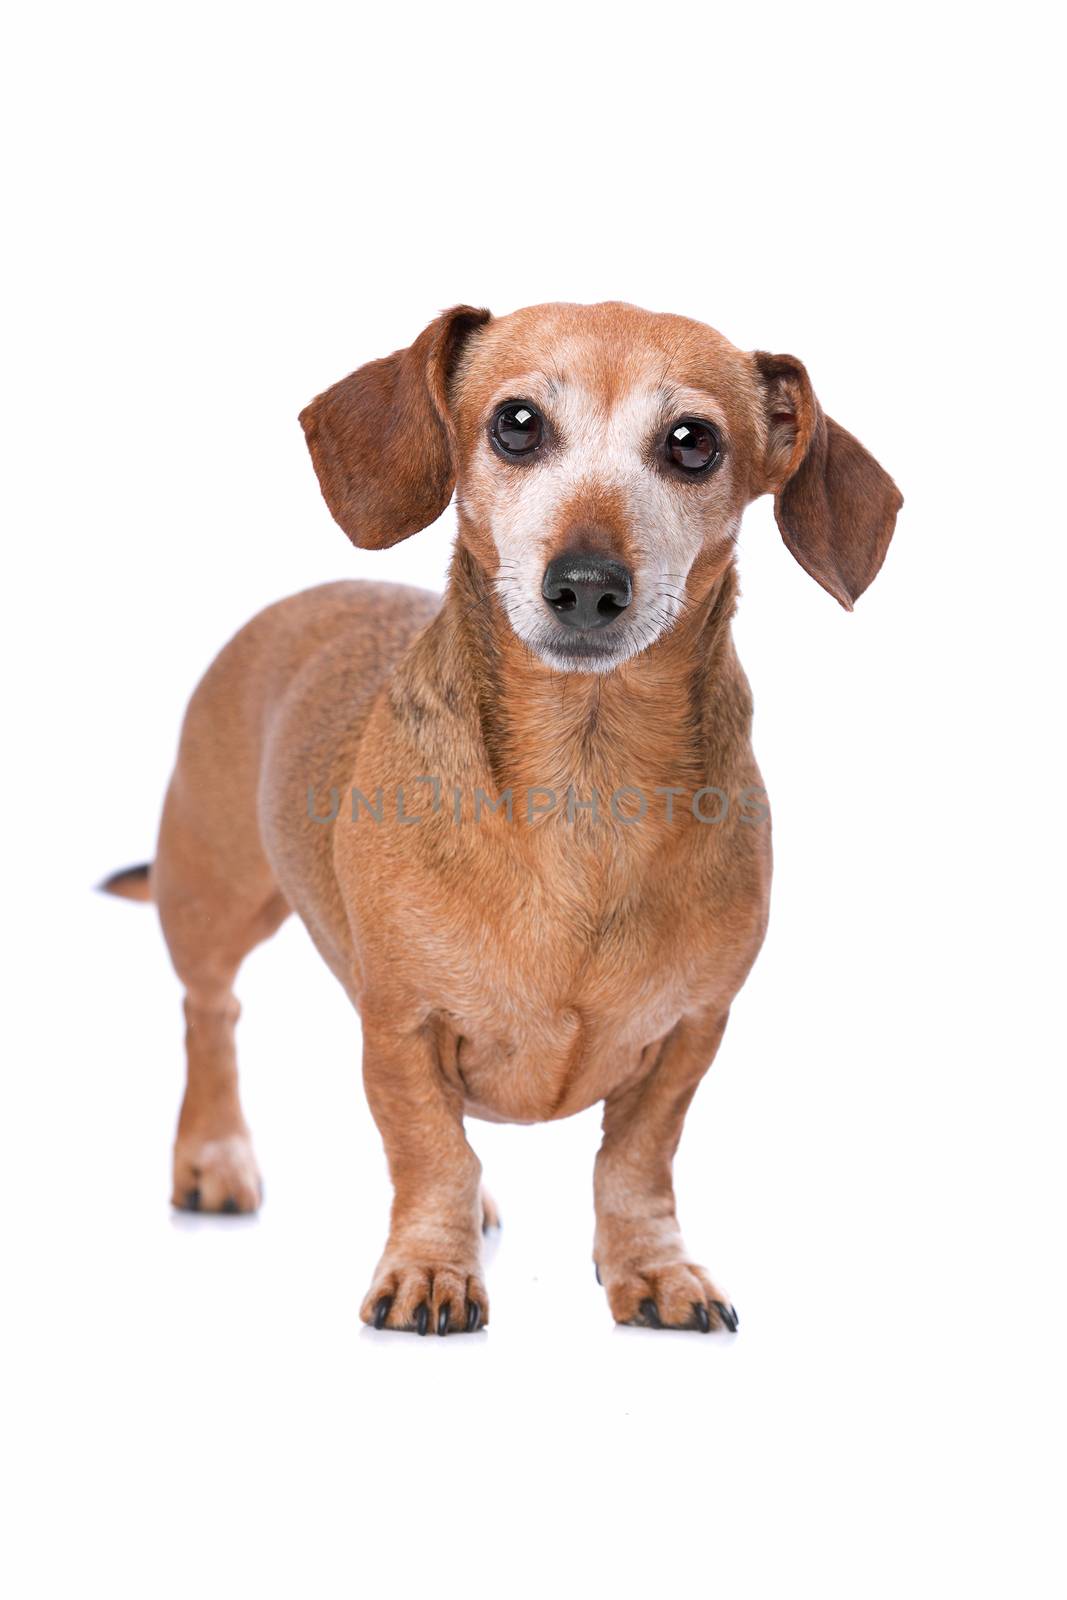 dachshund in front of a white background